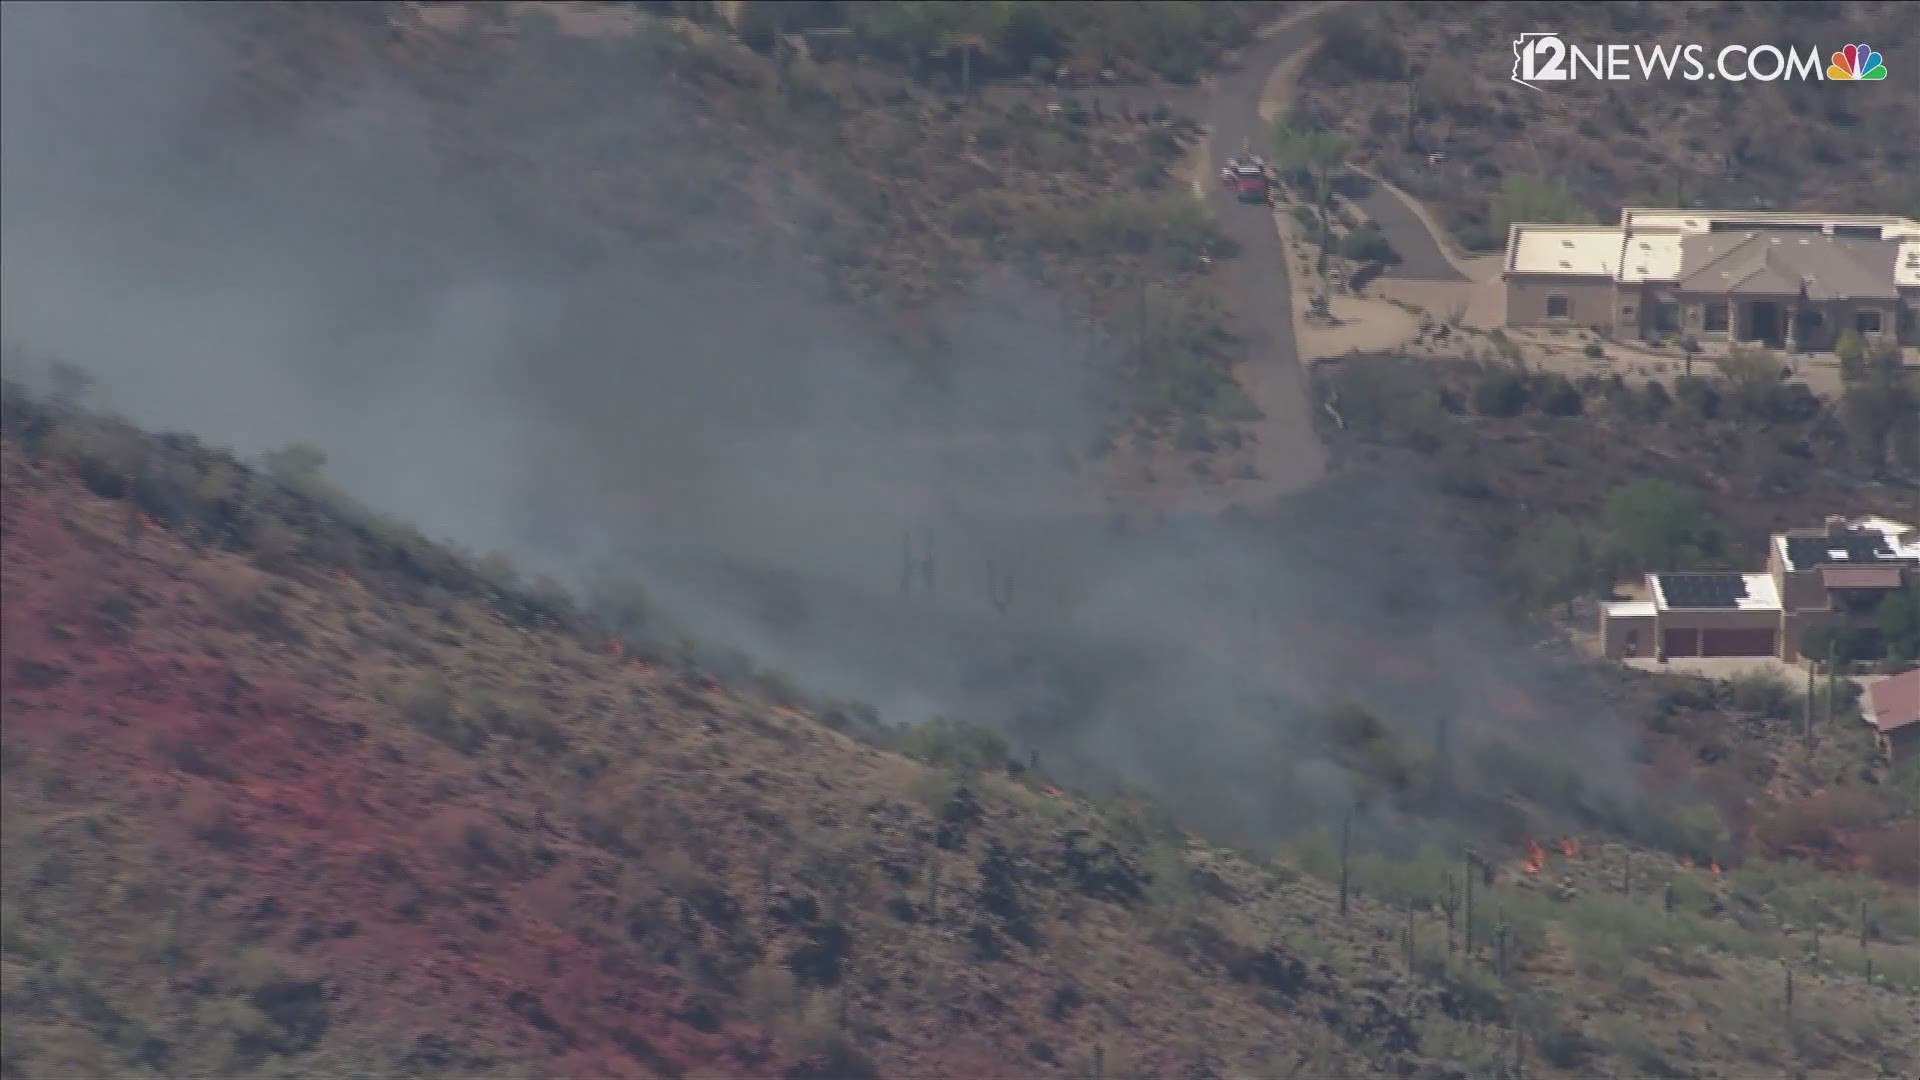 The Ocotillo Fire, which is near East Ocotillo Road and North 56th Circle, has already burned around 350 acres, officials said. Crews continue to fight the blaze.